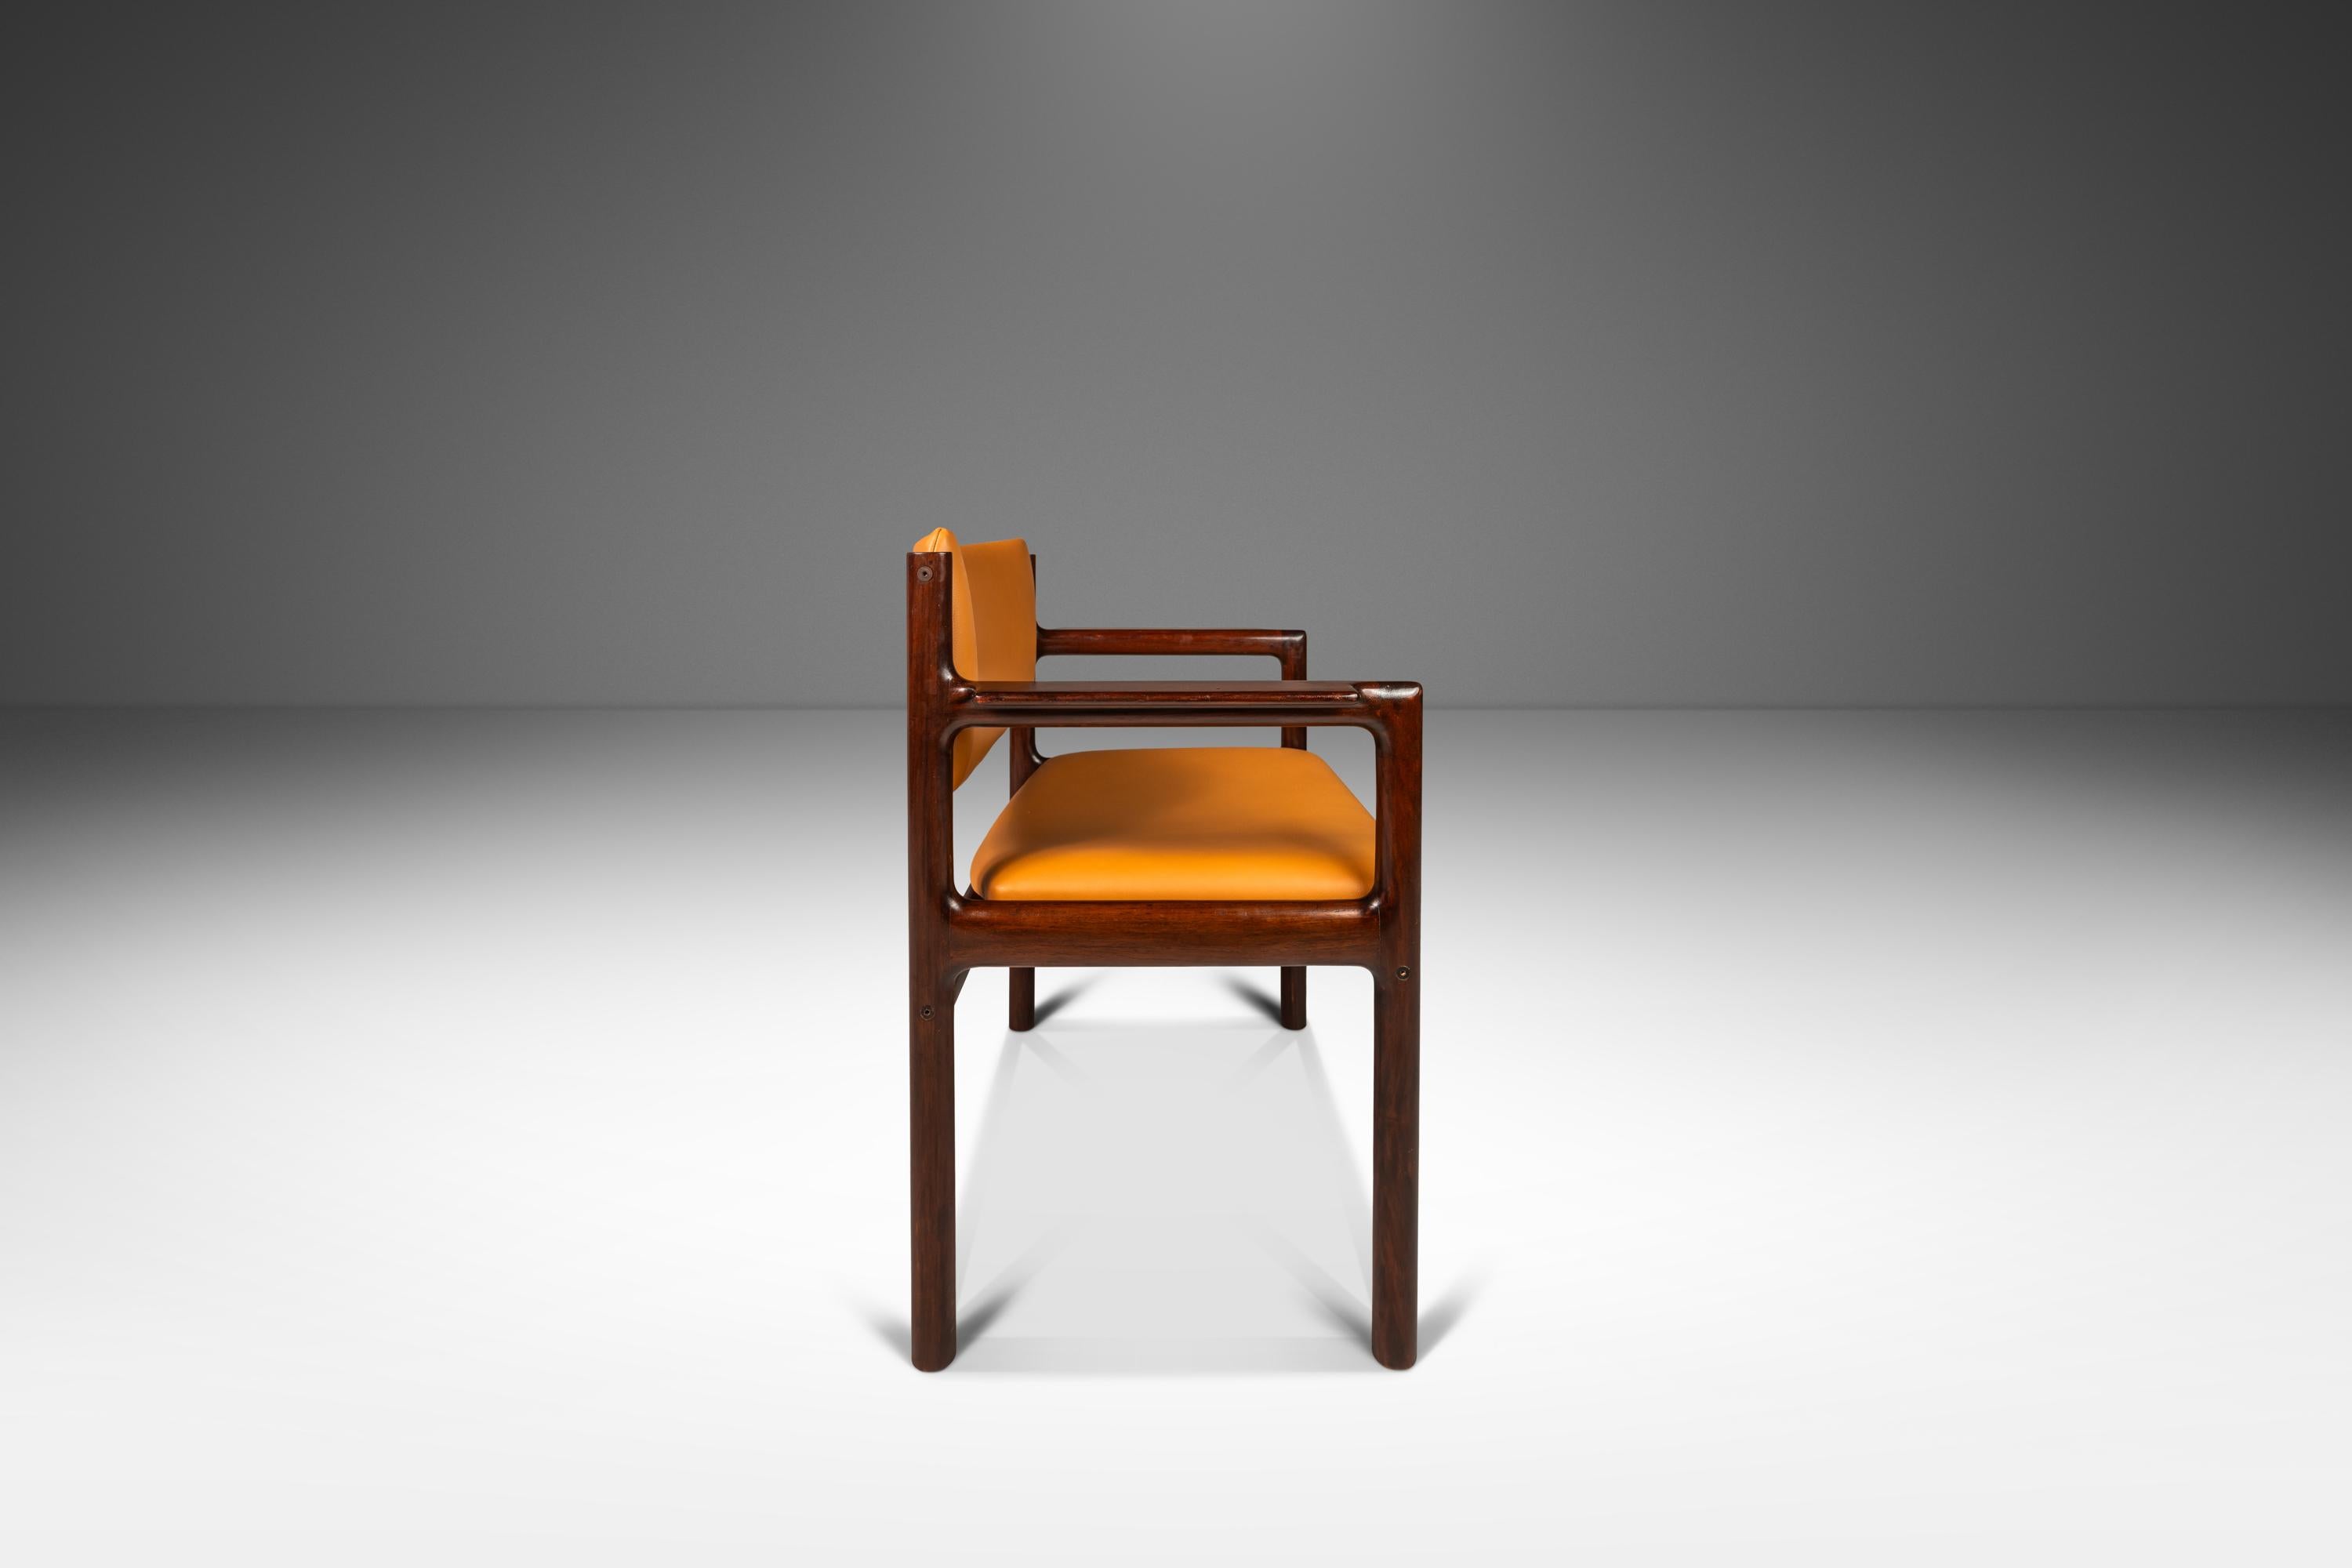 Introducing a rare Danish-designed arm chair constructed from solid mahogany and featuring new Italian leather upholstery. Simultaneously elegant and minimal this extraordinary chair is a designer's dream.

The mahogany frame, in 100% original